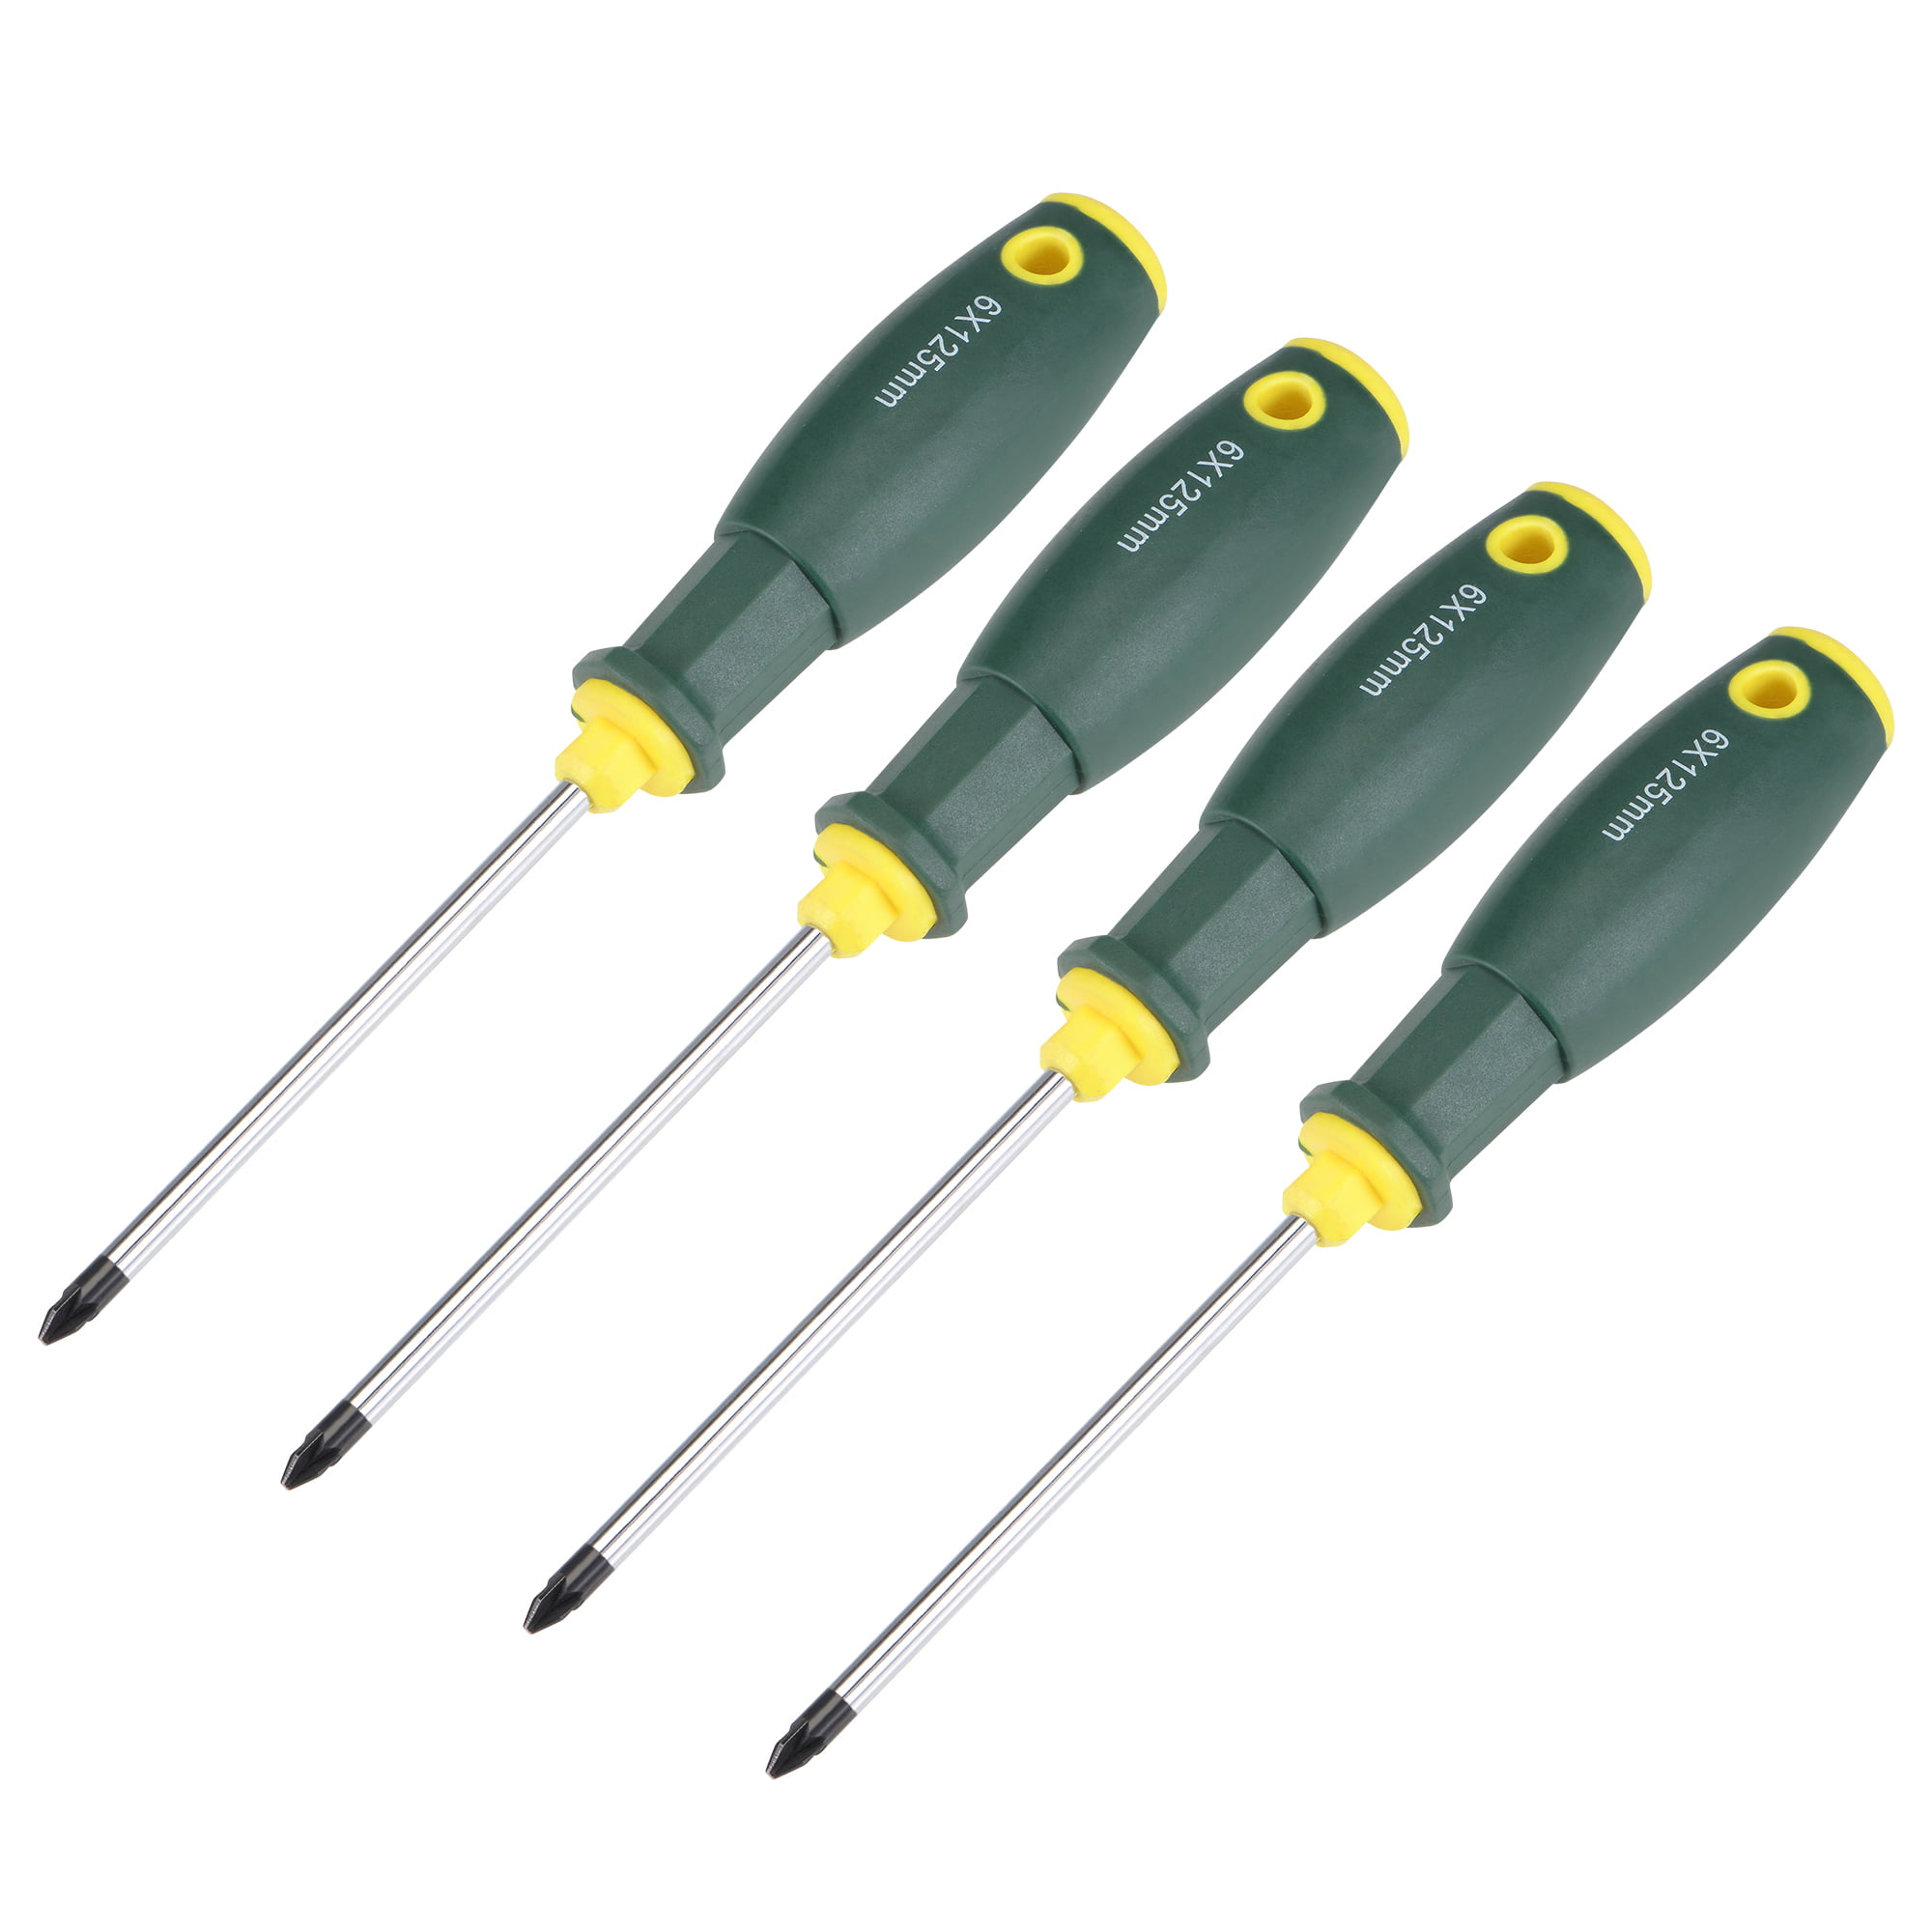 5 Screwdriver Magnetic Set Heavy Duty Grip Handle Philips Flat To Carbon Steel 